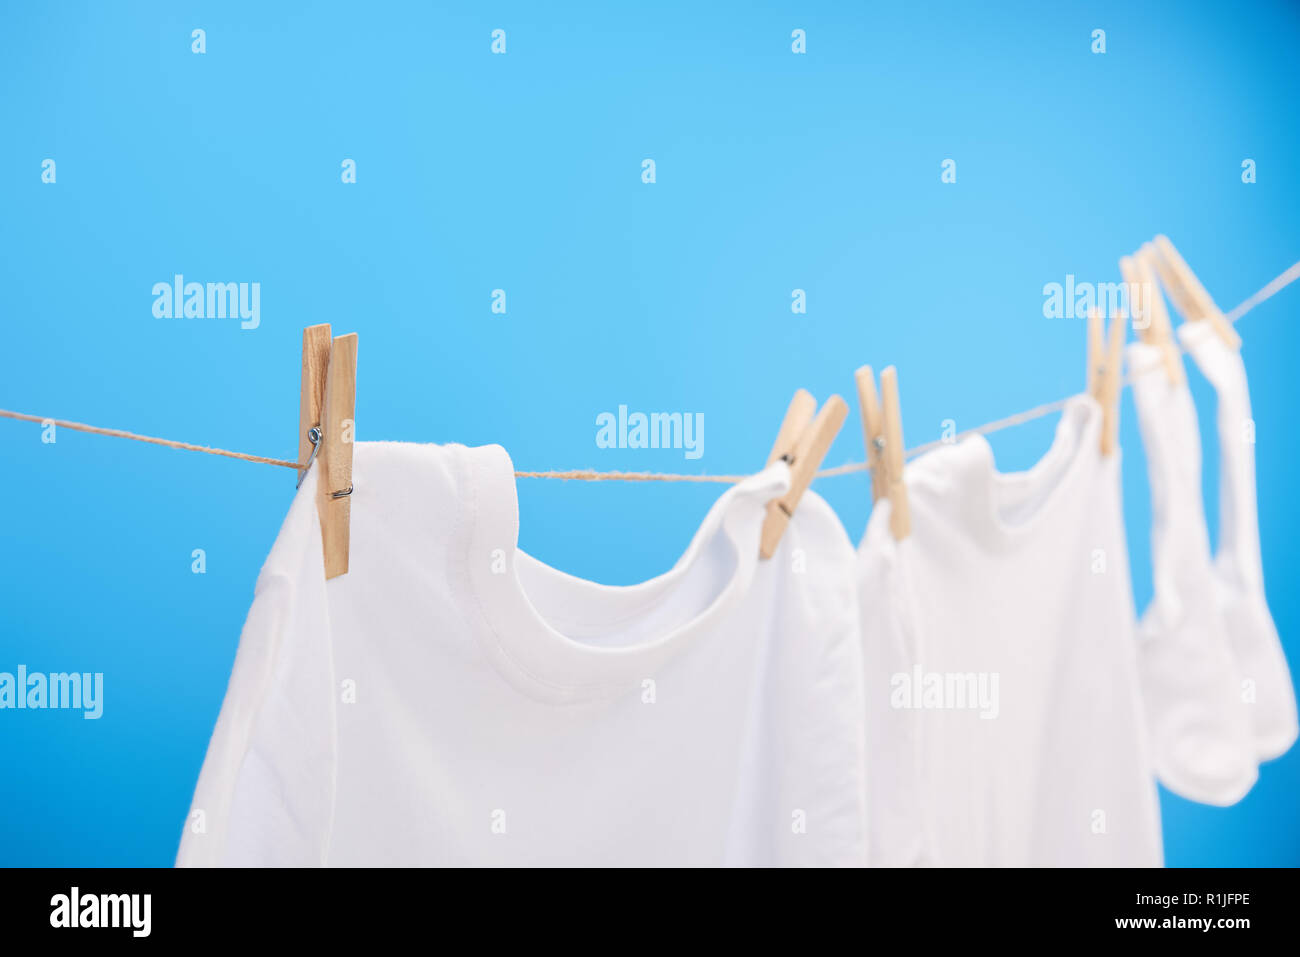 close-up view of clean white t-shirts and socks hanging on clothesline isolated on blue Stock Photo